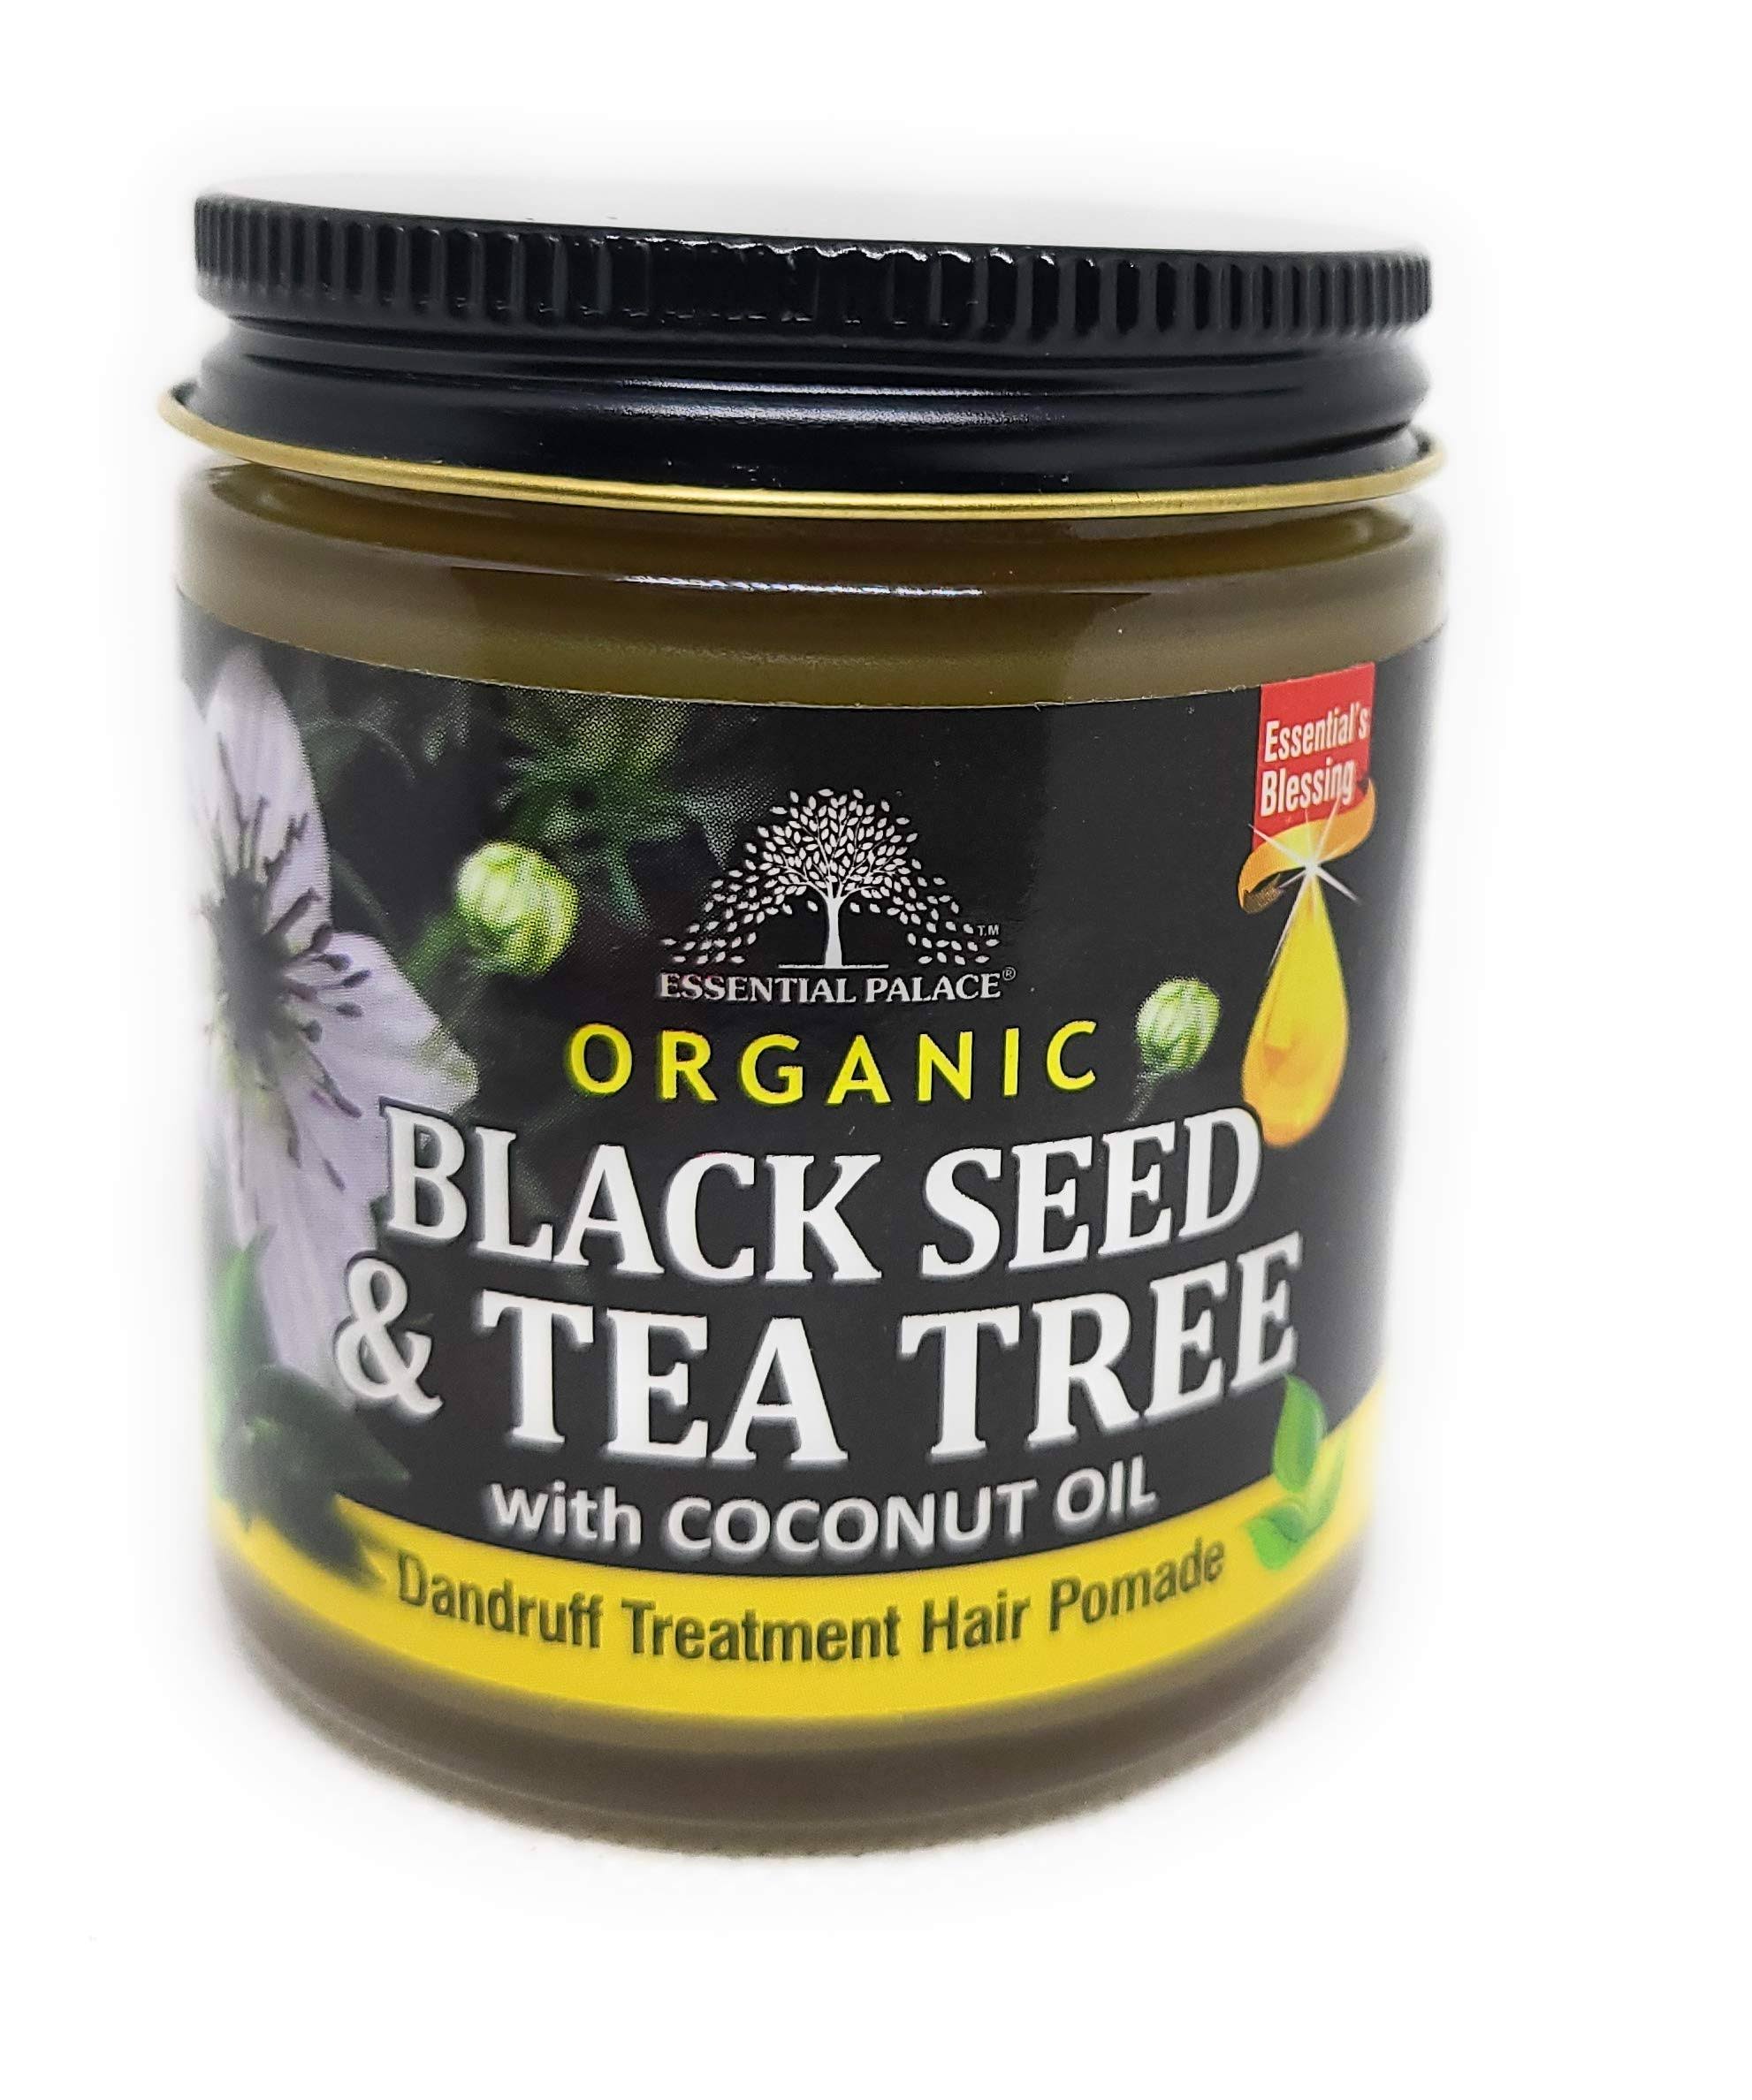 Organic Black Seed and Tea Tree with Coconut Oil Dandruff Treatment Hair Pomade 1 Count